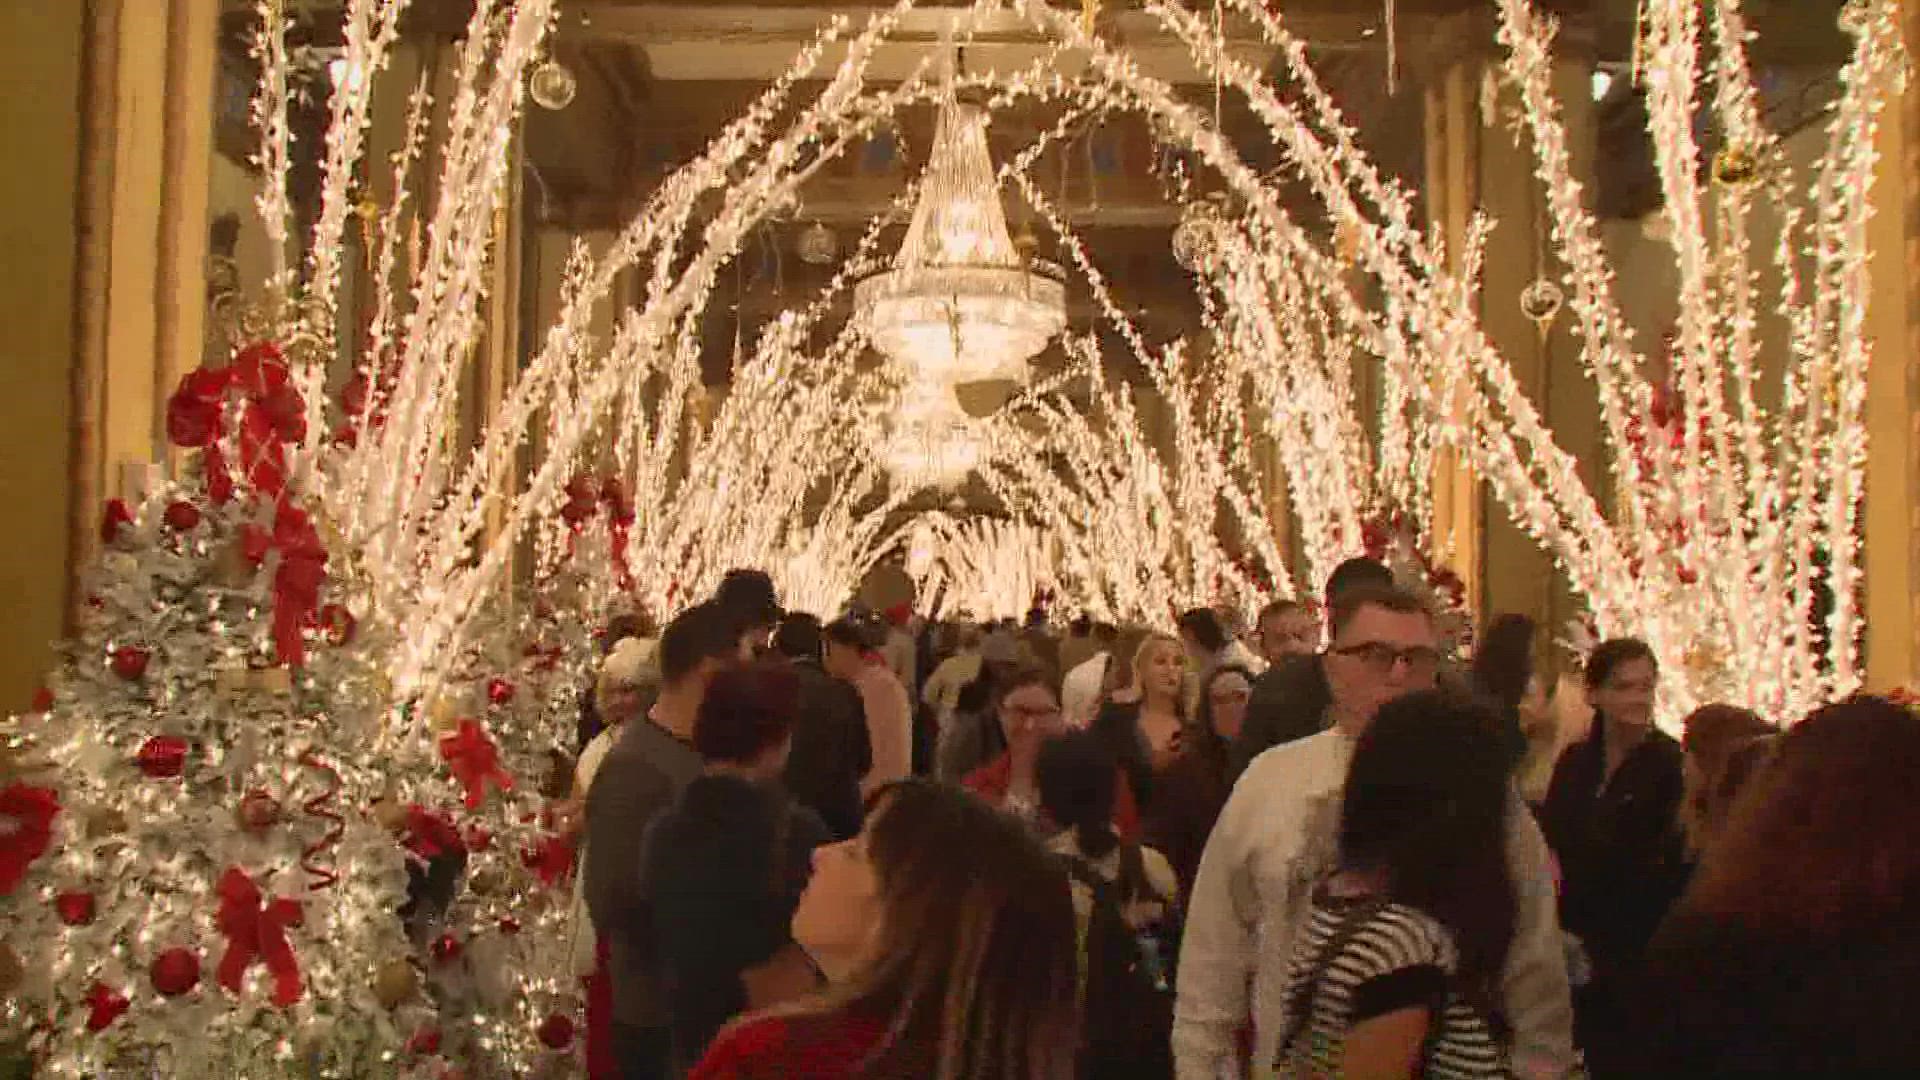 The Waldorf Wonderland is the most spectacular indoor holiday decoration anywhere, and when it goes up, it’s the unofficial signal that it’s Christmastime in N.O.